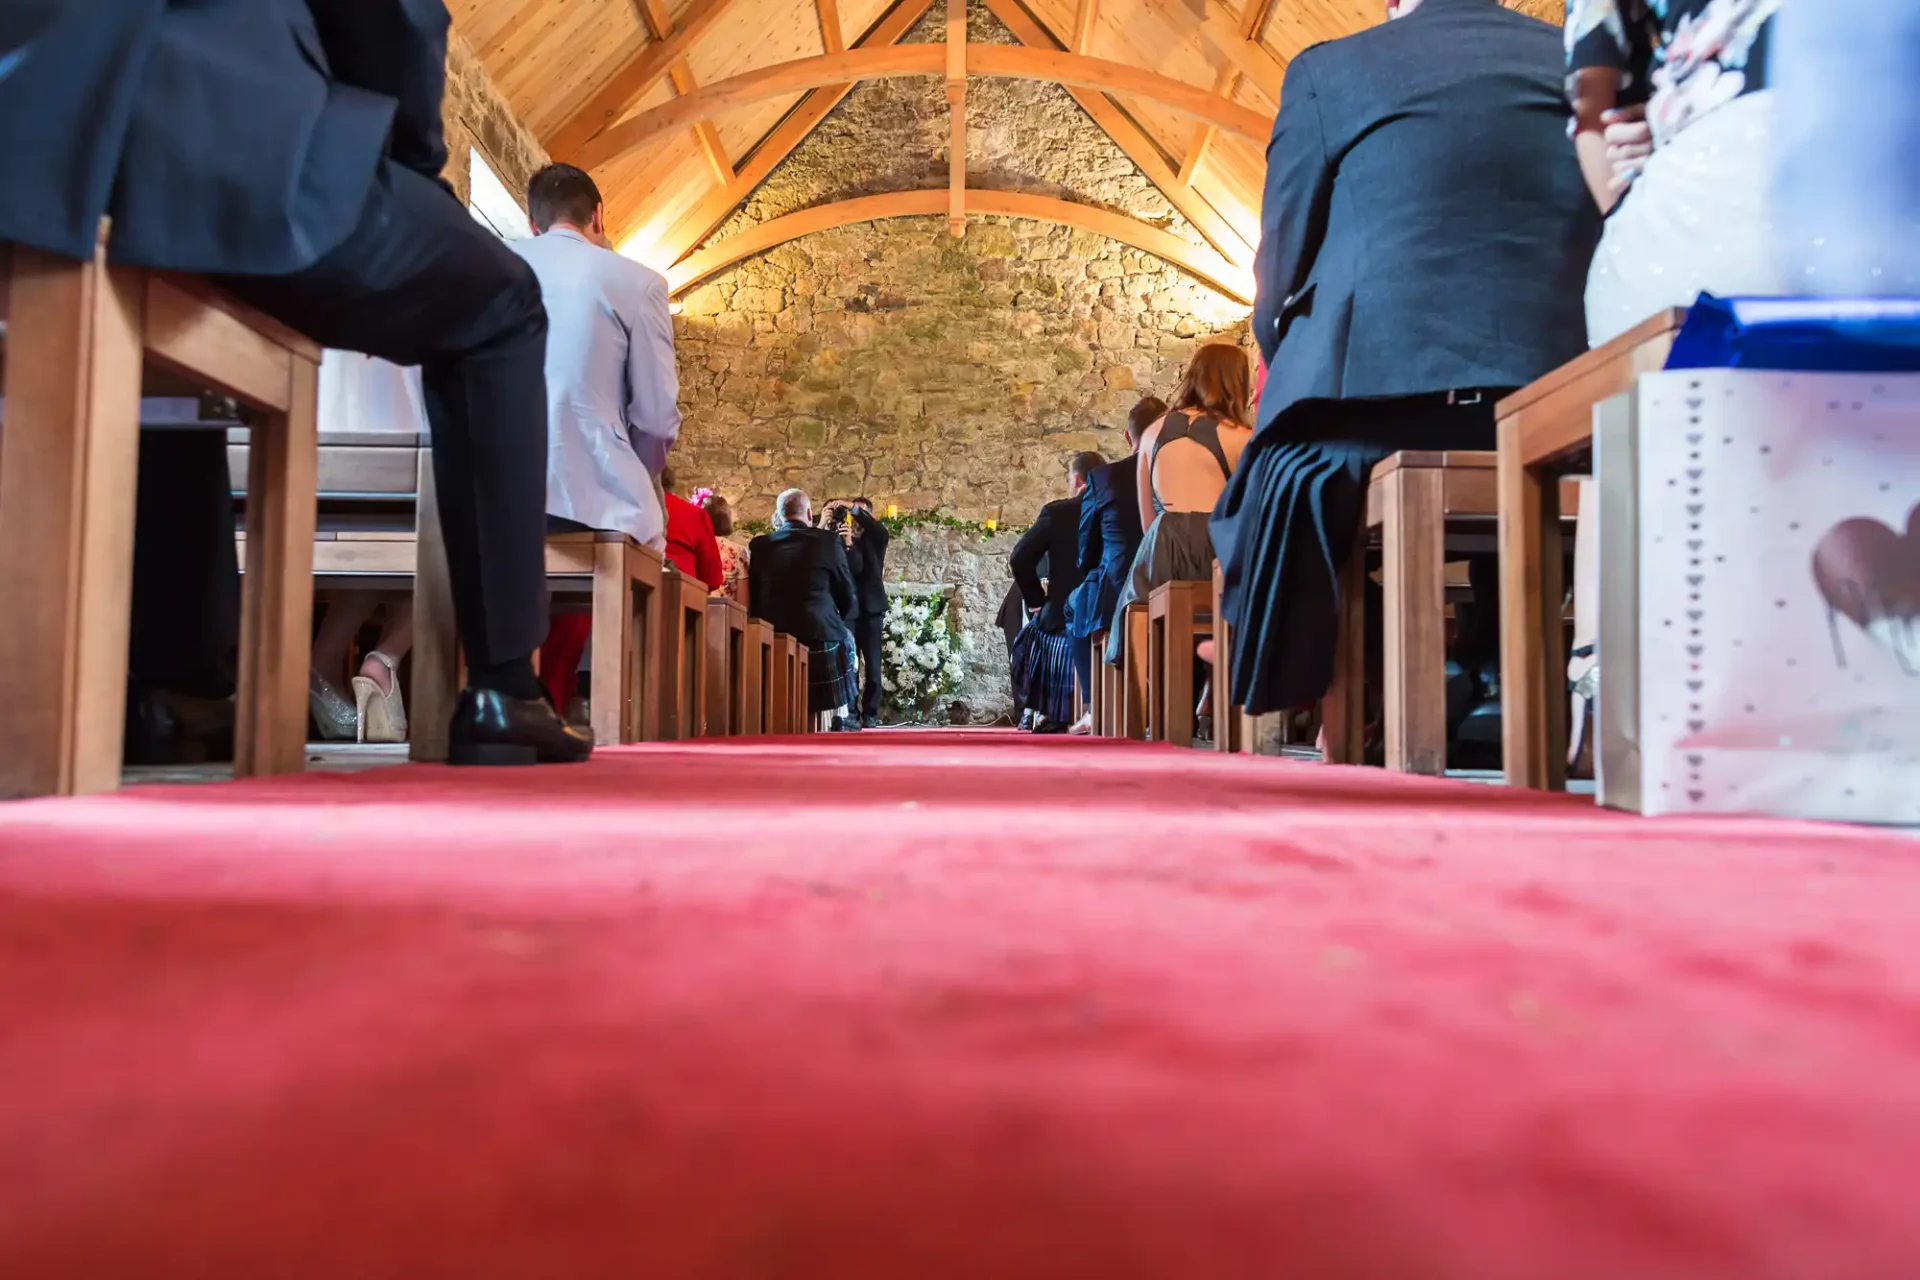 Guests line up inside a stone chapel with a red carpet leading to the altar during a wedding ceremony.